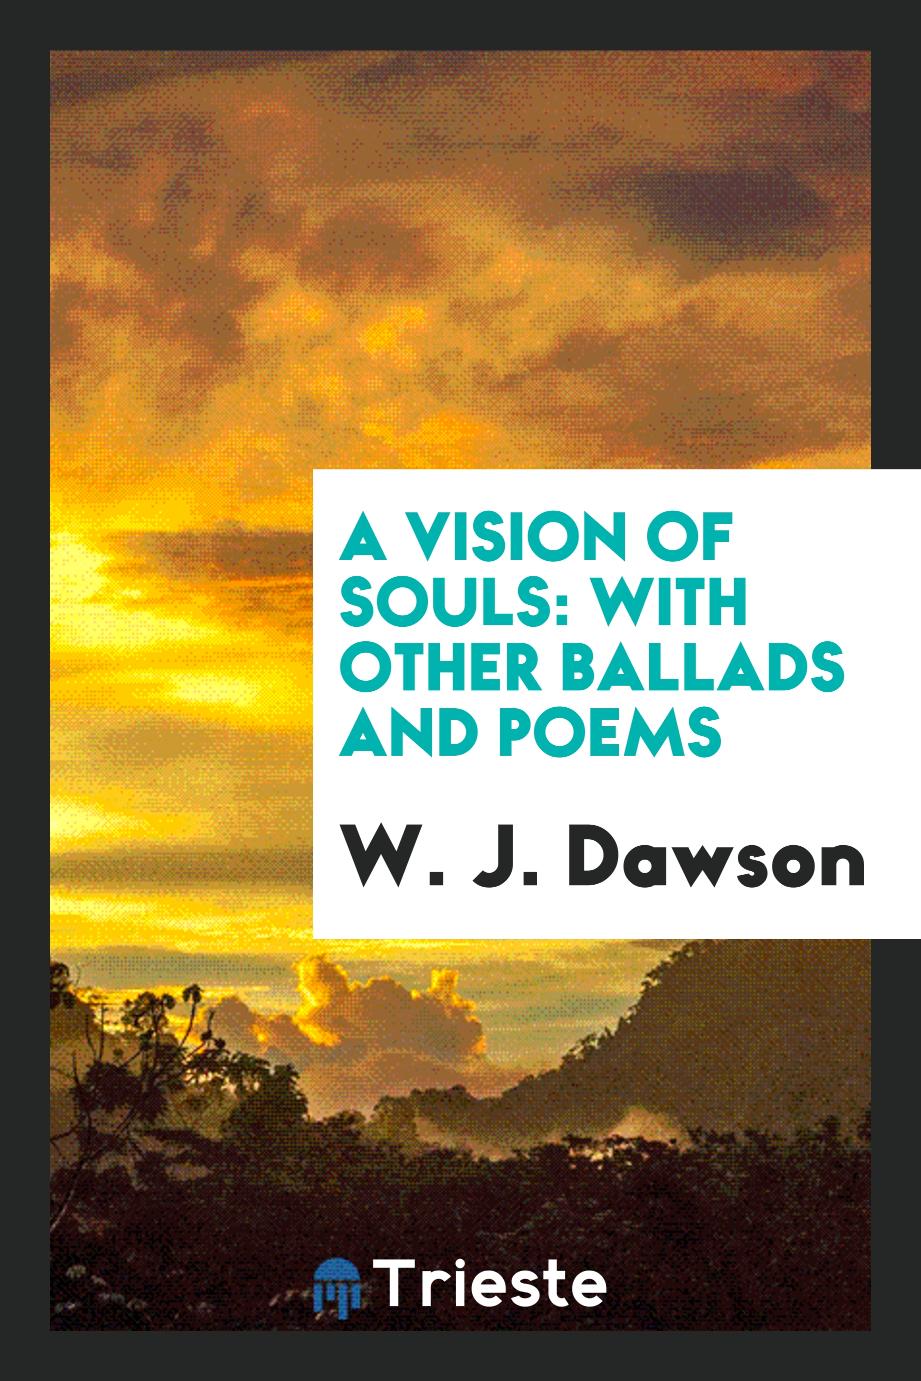 A vision of souls: with other ballads and poems